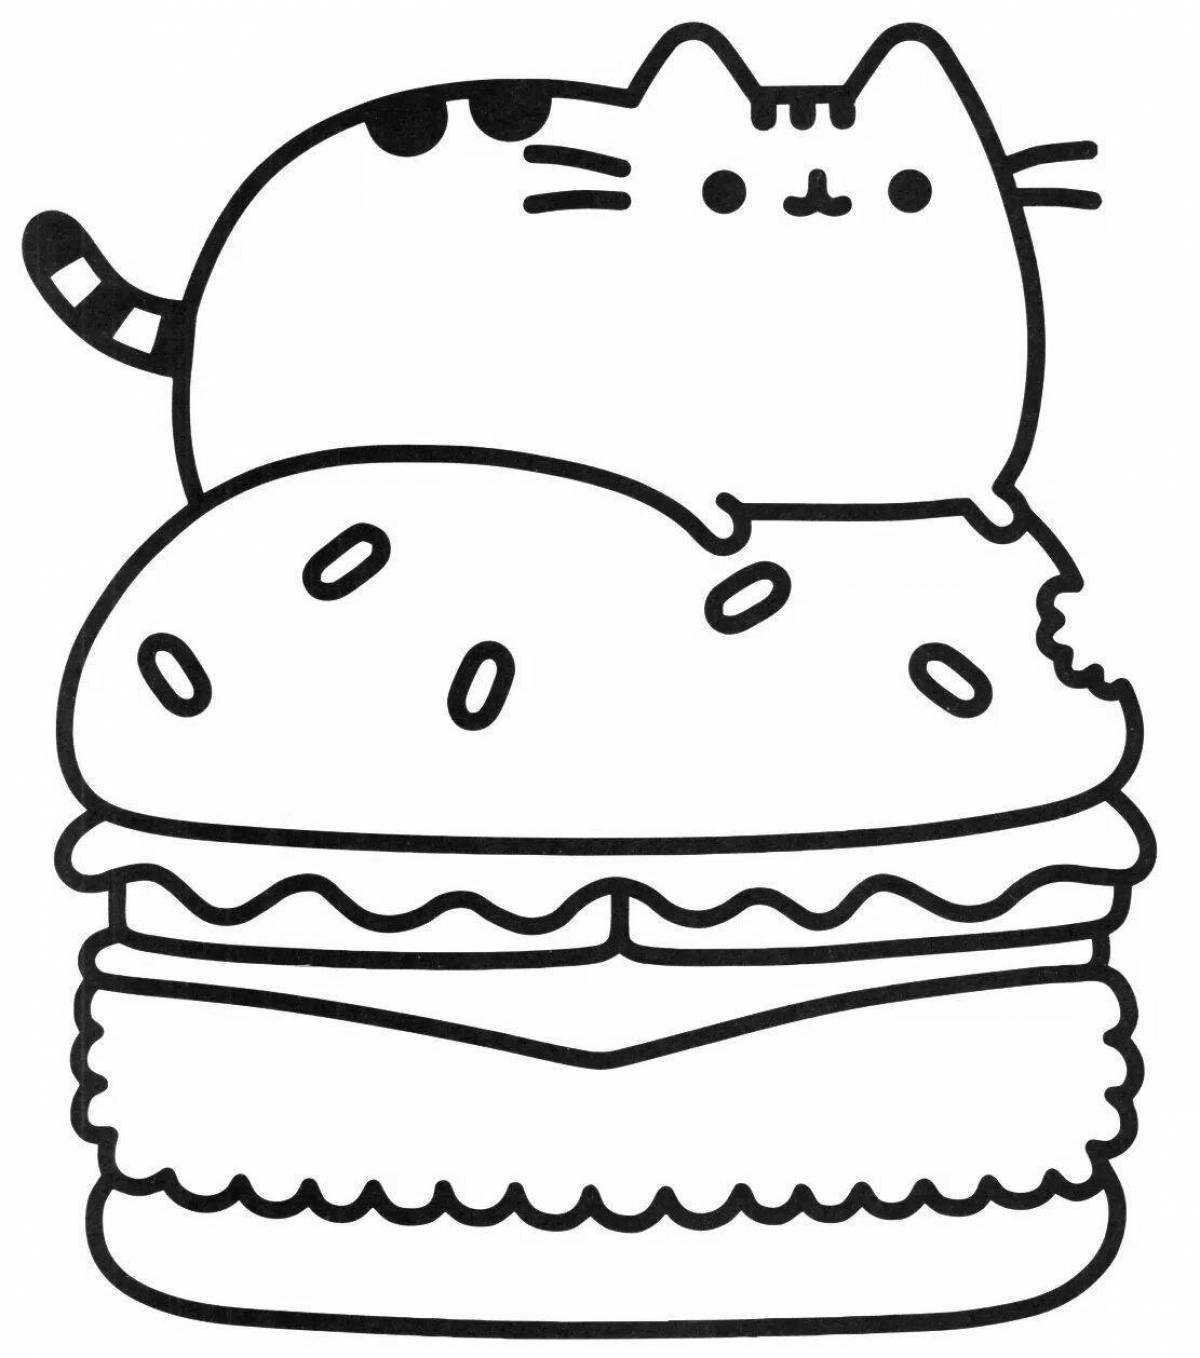 Blessed Pusheen kitten coloring page